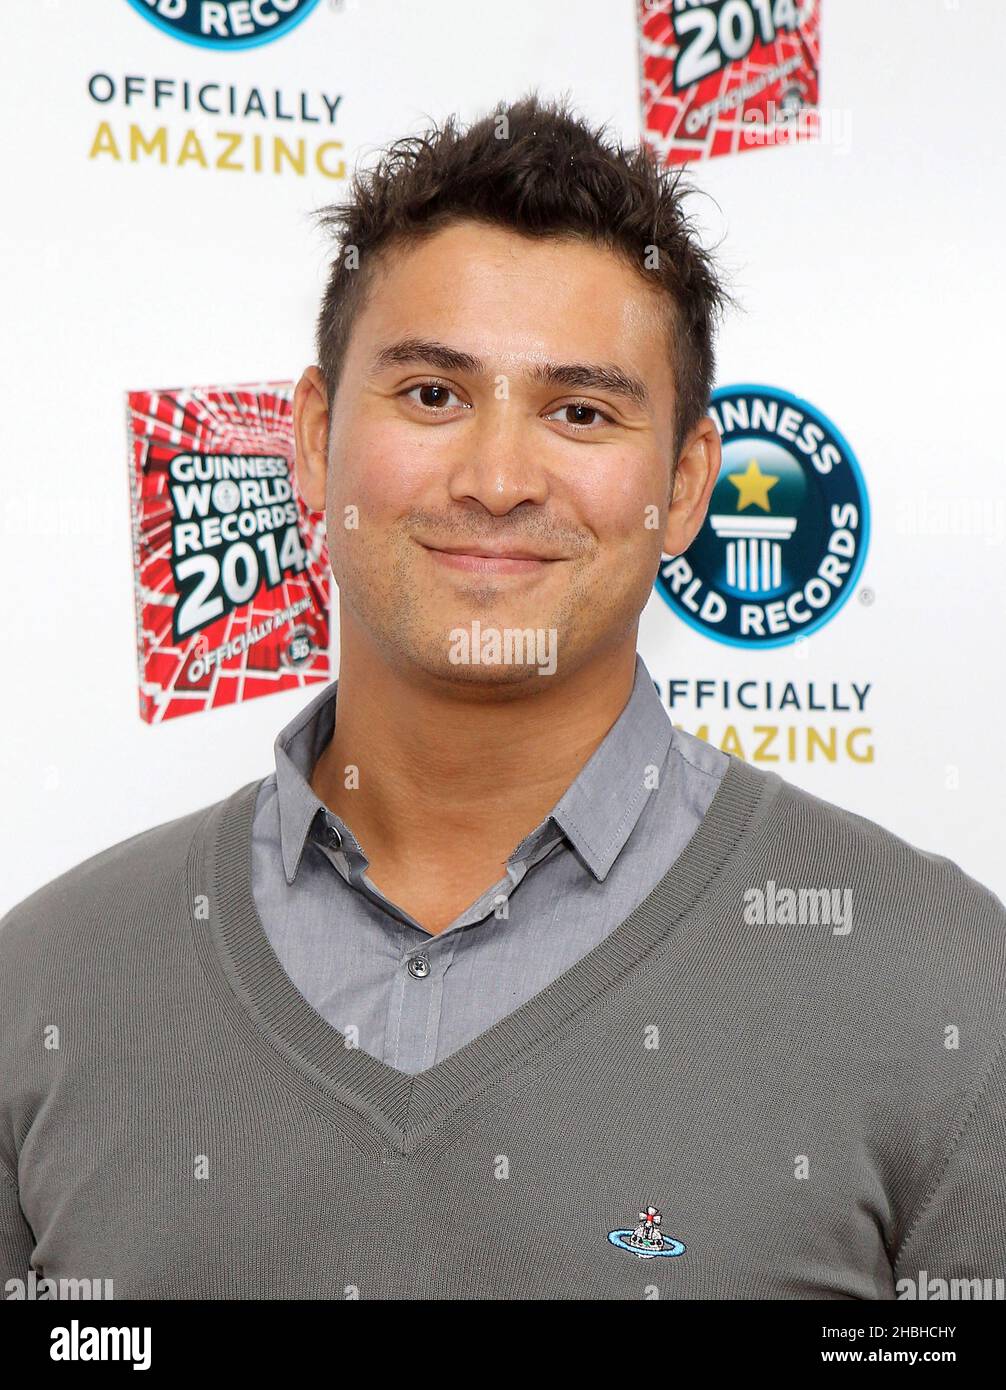 Rav Wilding attends the Guinness Book of Records 2014 Launch Party at One Marylebone in London. Stock Photo